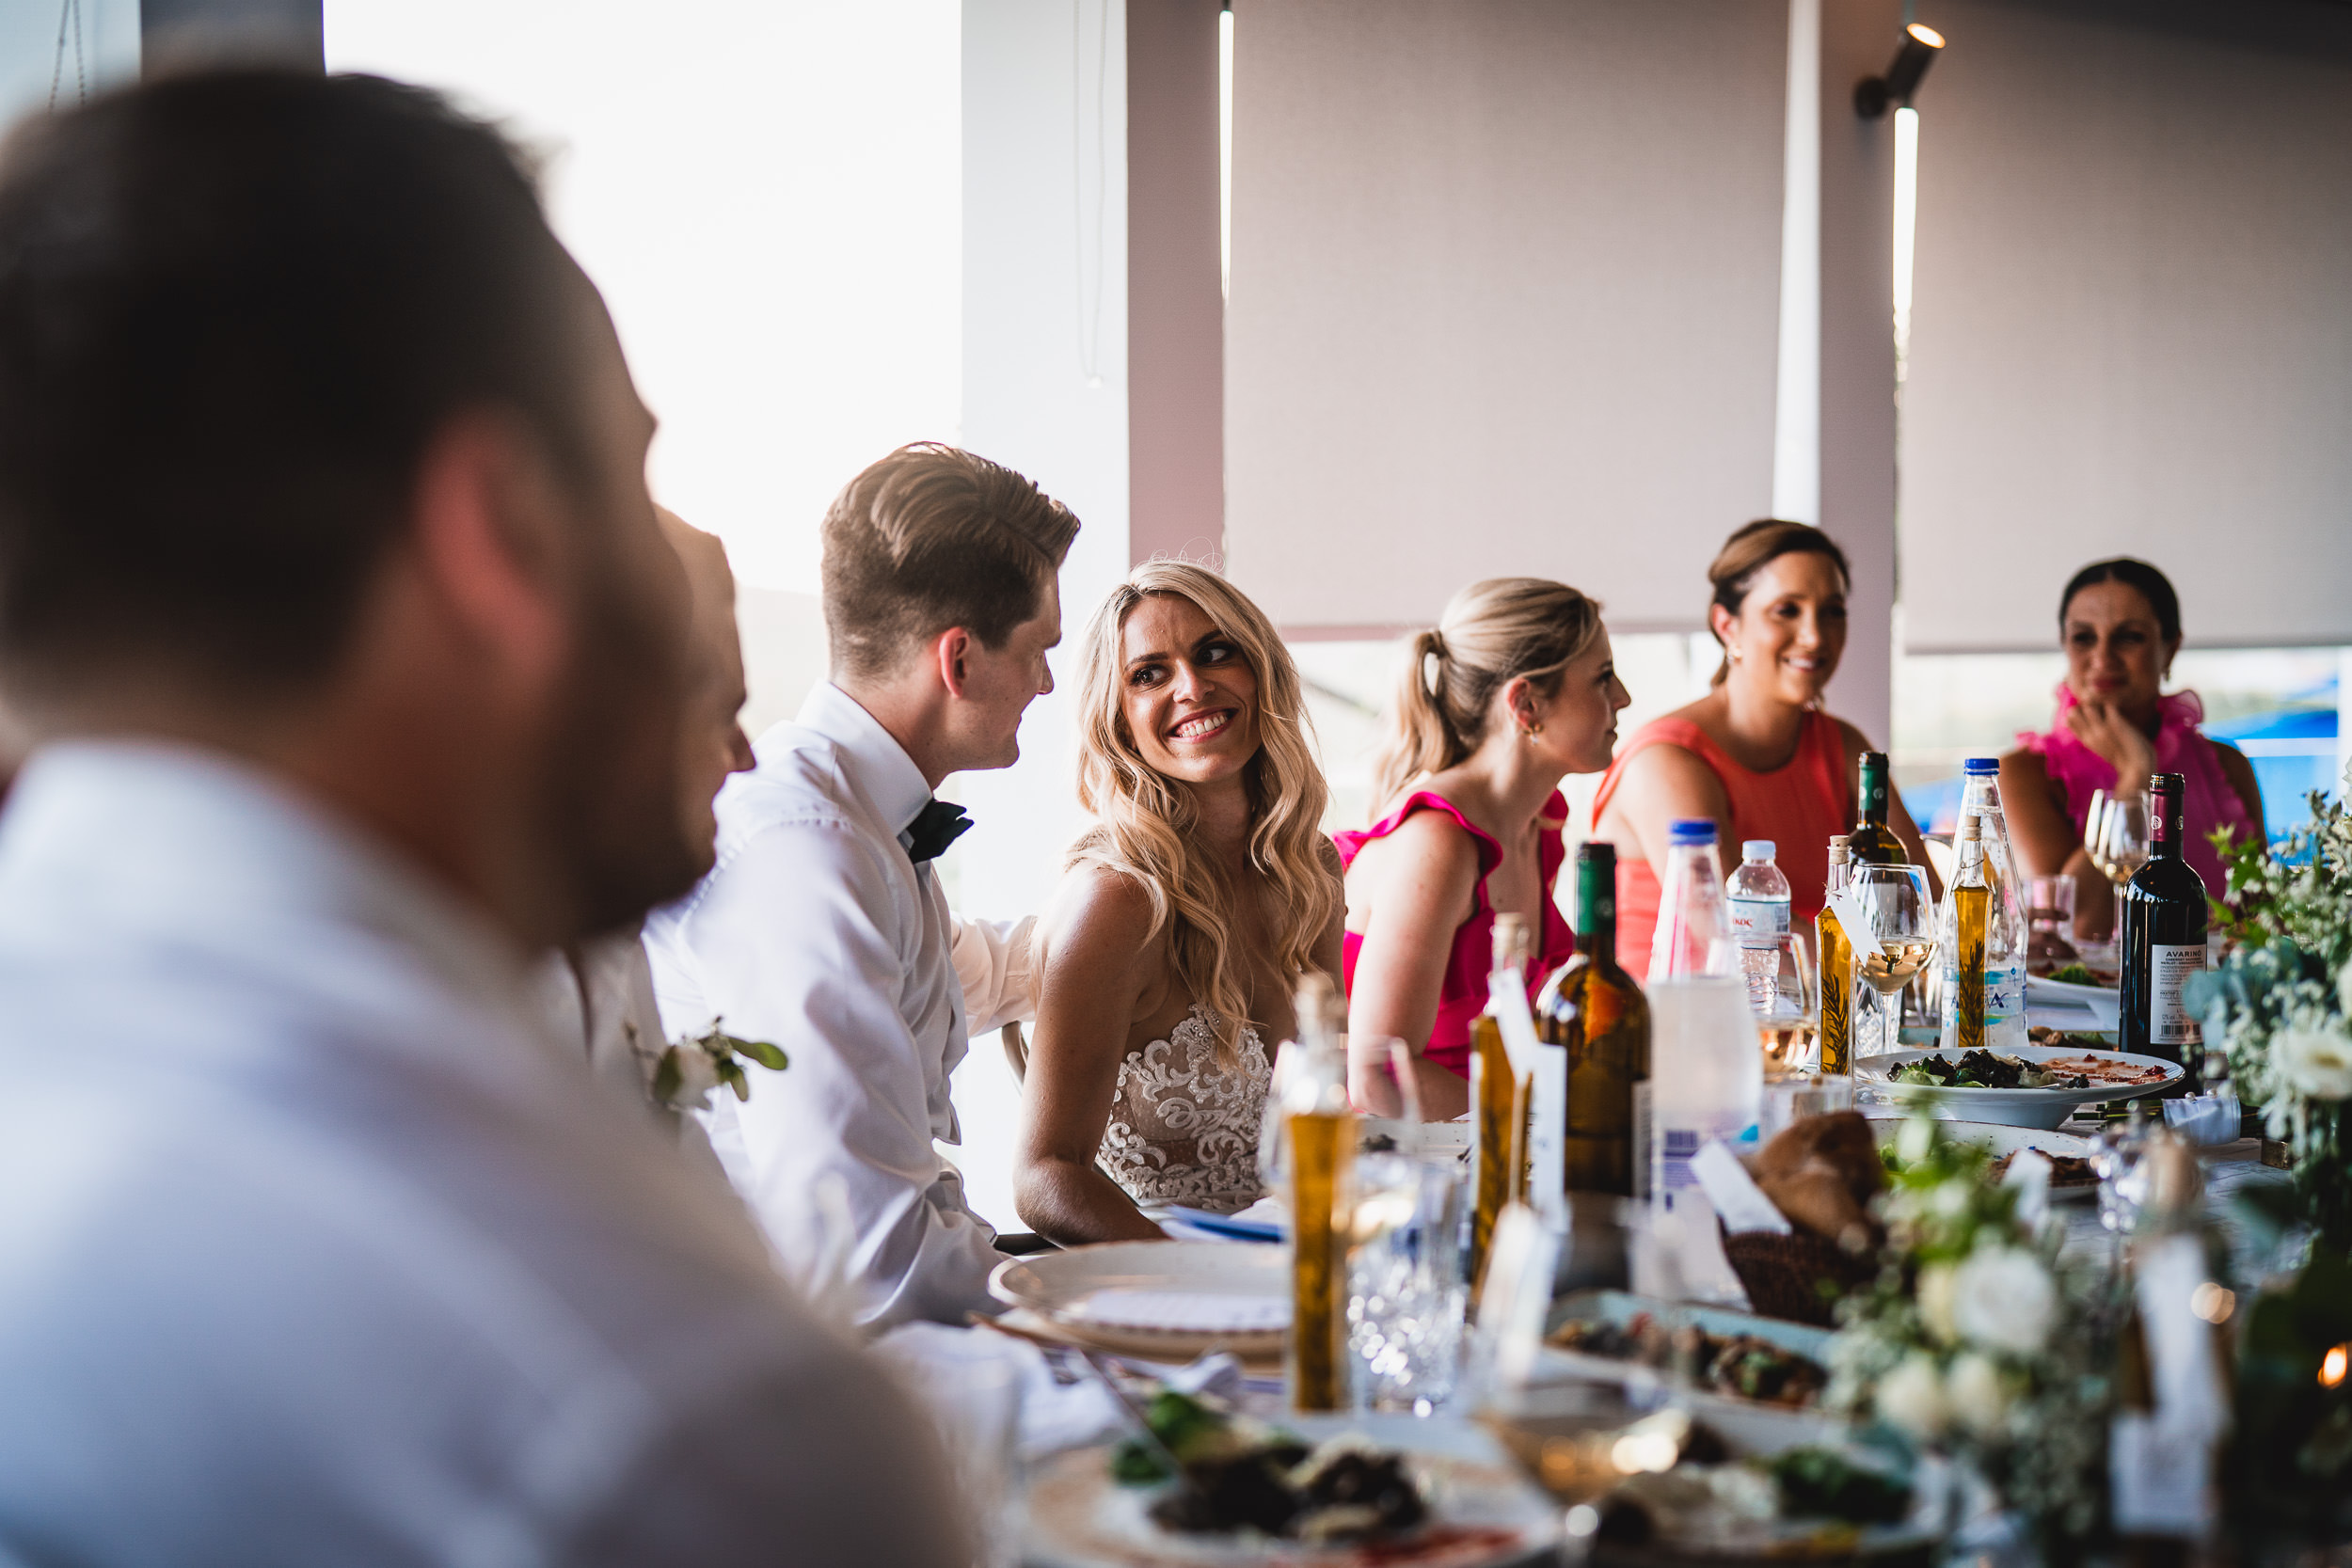 A group of people, including the bride and wedding photographer, sitting around a table at a wedding reception.